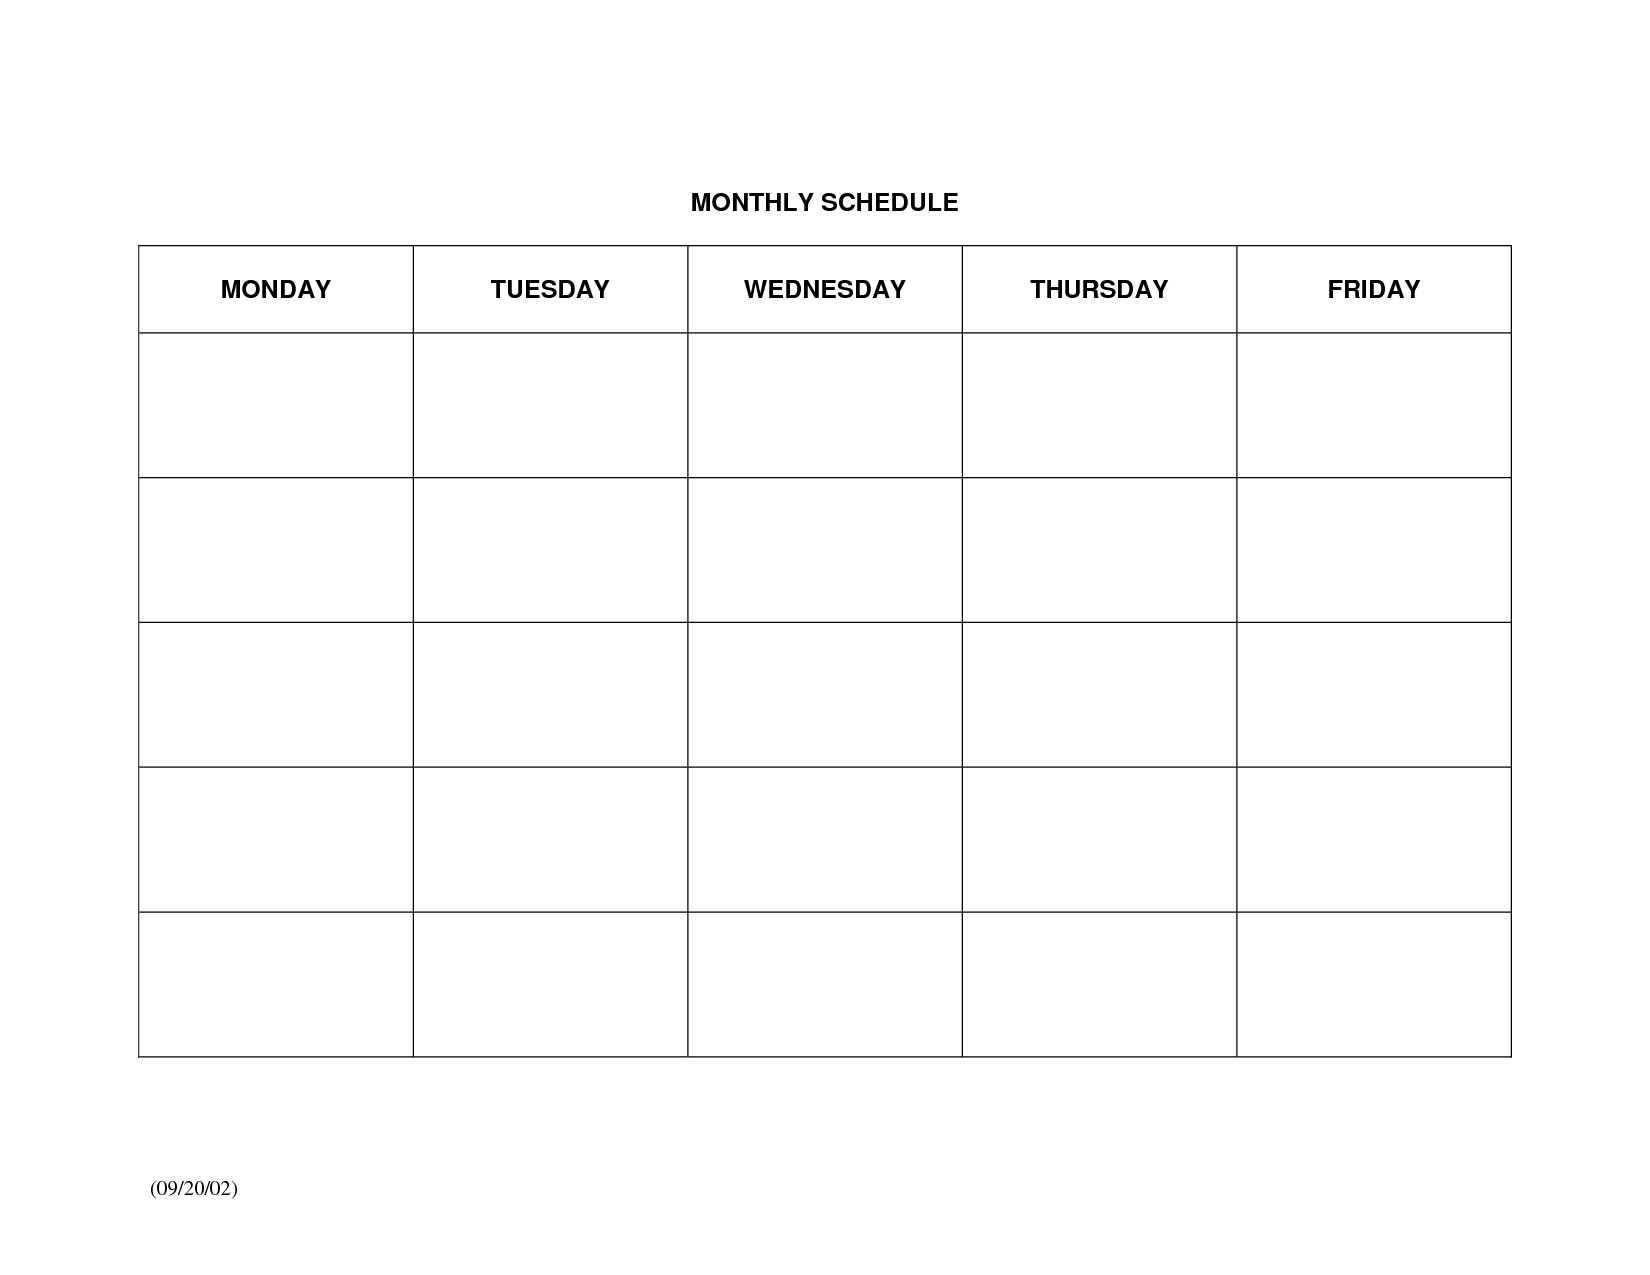 Schedule Template Monthly Calendar Printable Large Blank Weekly Free within Large Blank Monthly Calendar To Fill In